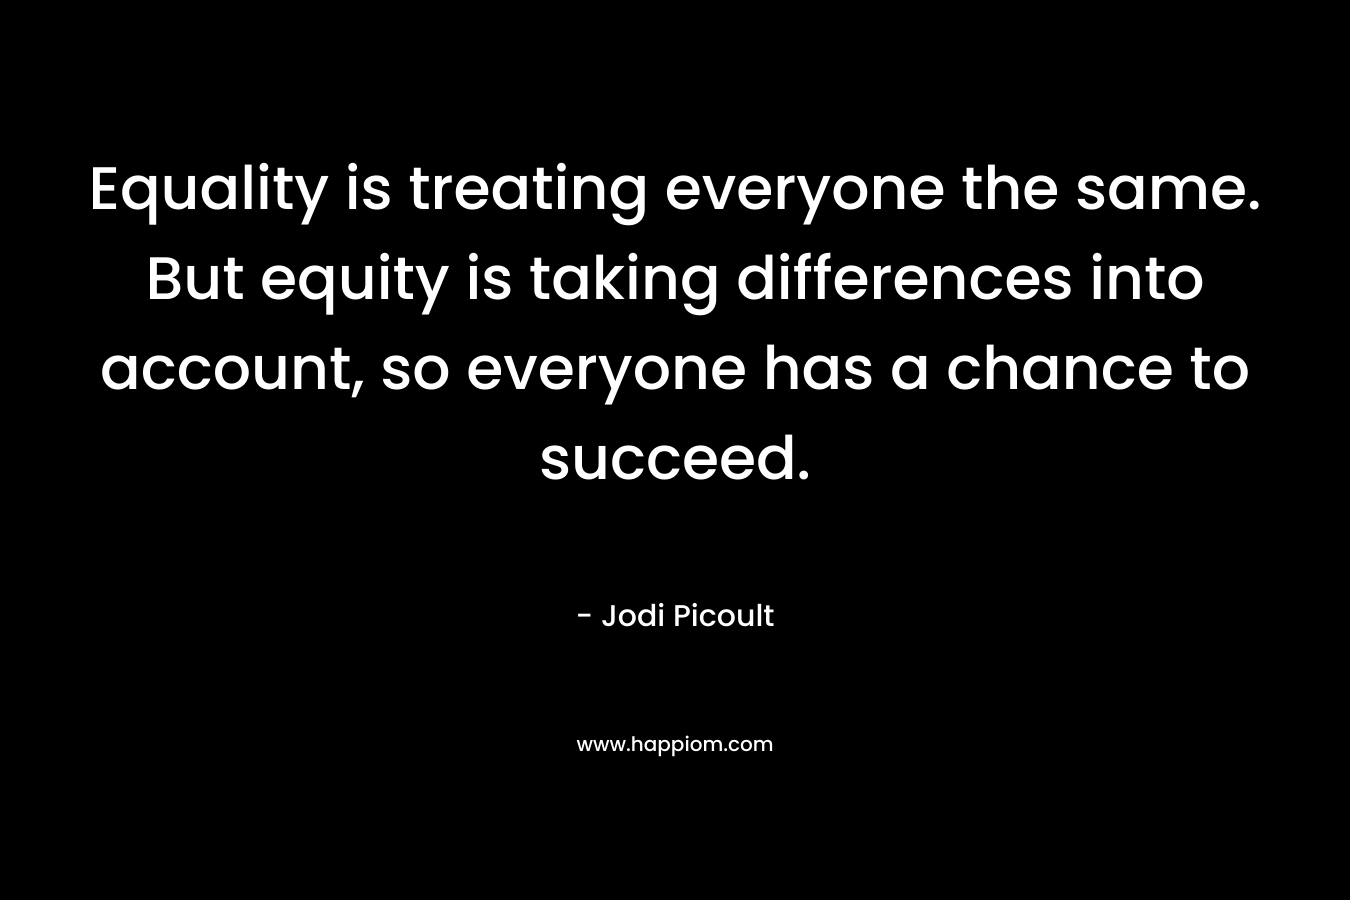 Equality is treating everyone the same. But equity is taking differences into account, so everyone has a chance to succeed. – Jodi Picoult